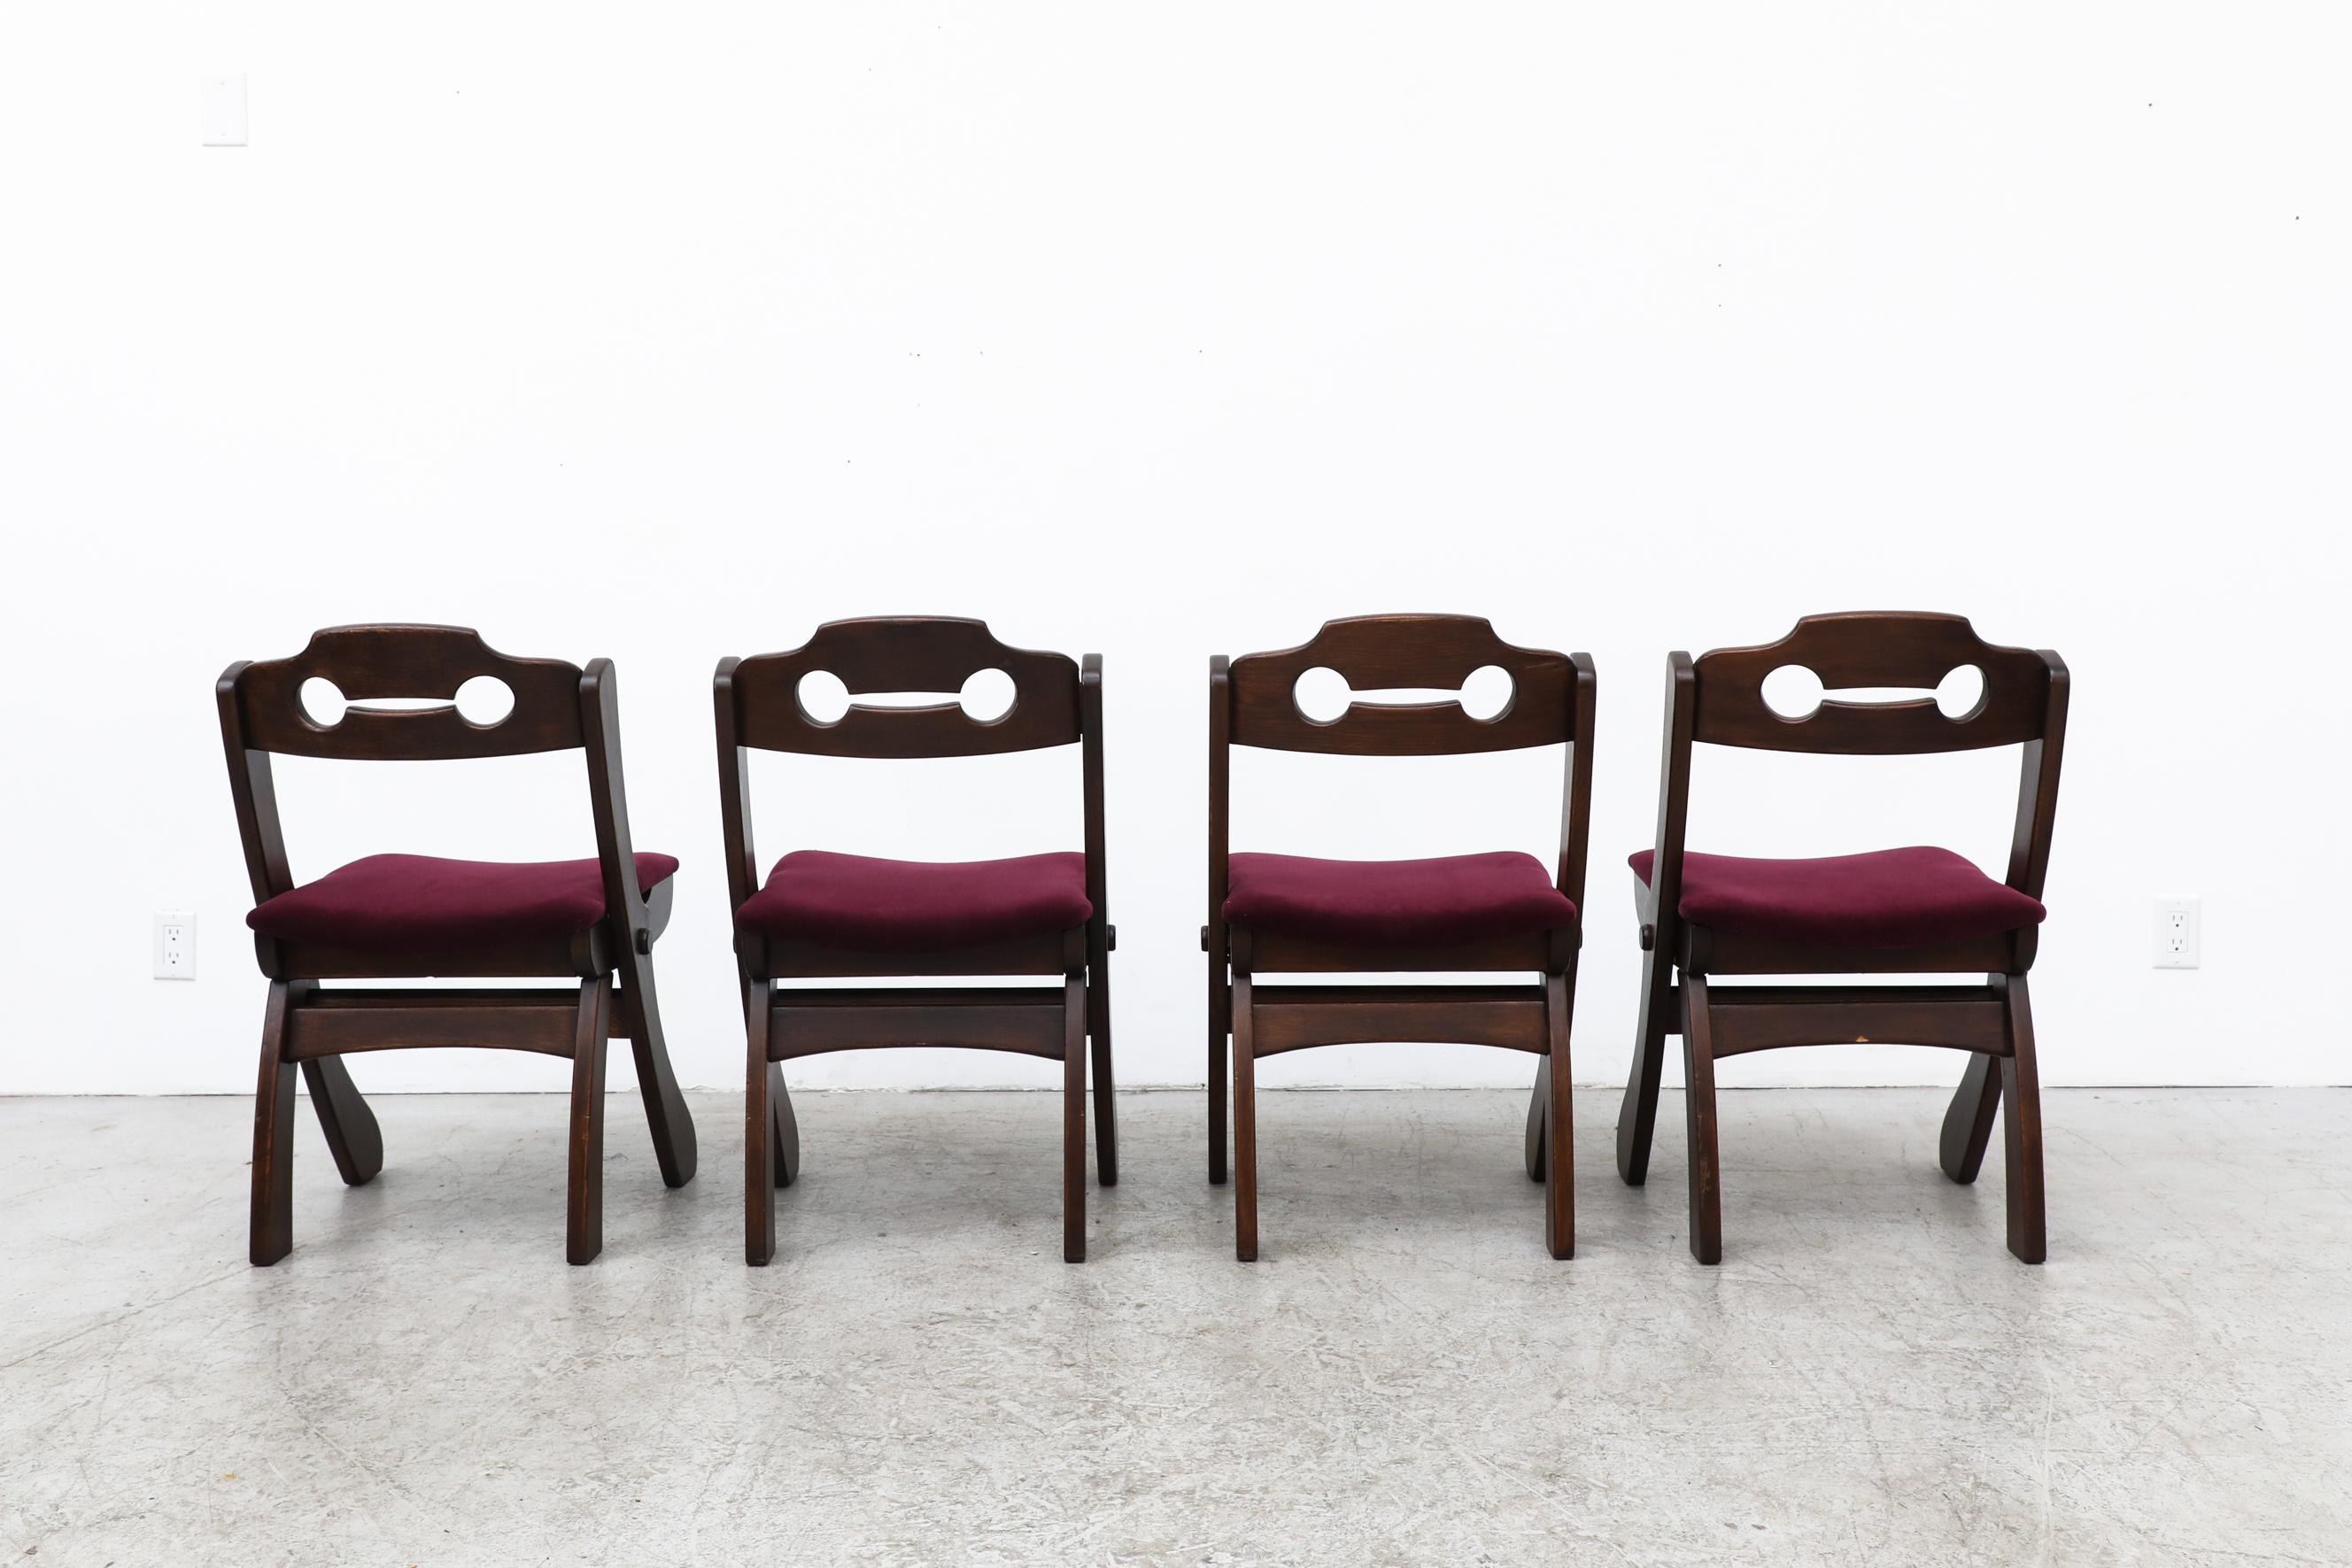 Set of 4 Dark Stained Brutalist Razor Back Chairs with New Burgundy Velvet Seats For Sale 2